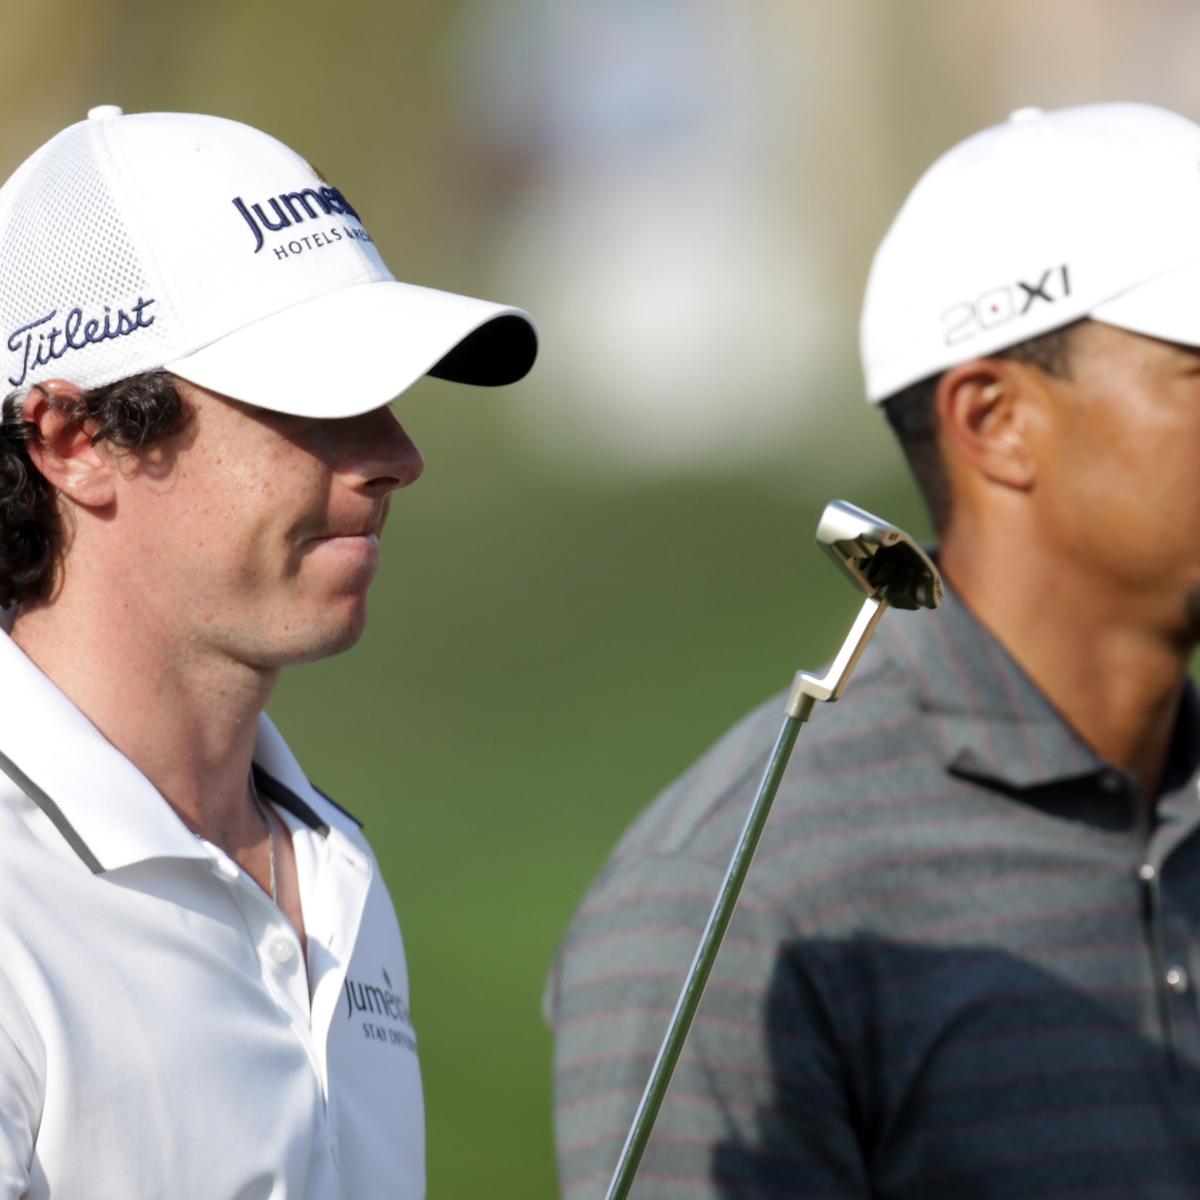 Players Championship Cut Line Rory McIlroy Is Out, Tiger Woods Is in